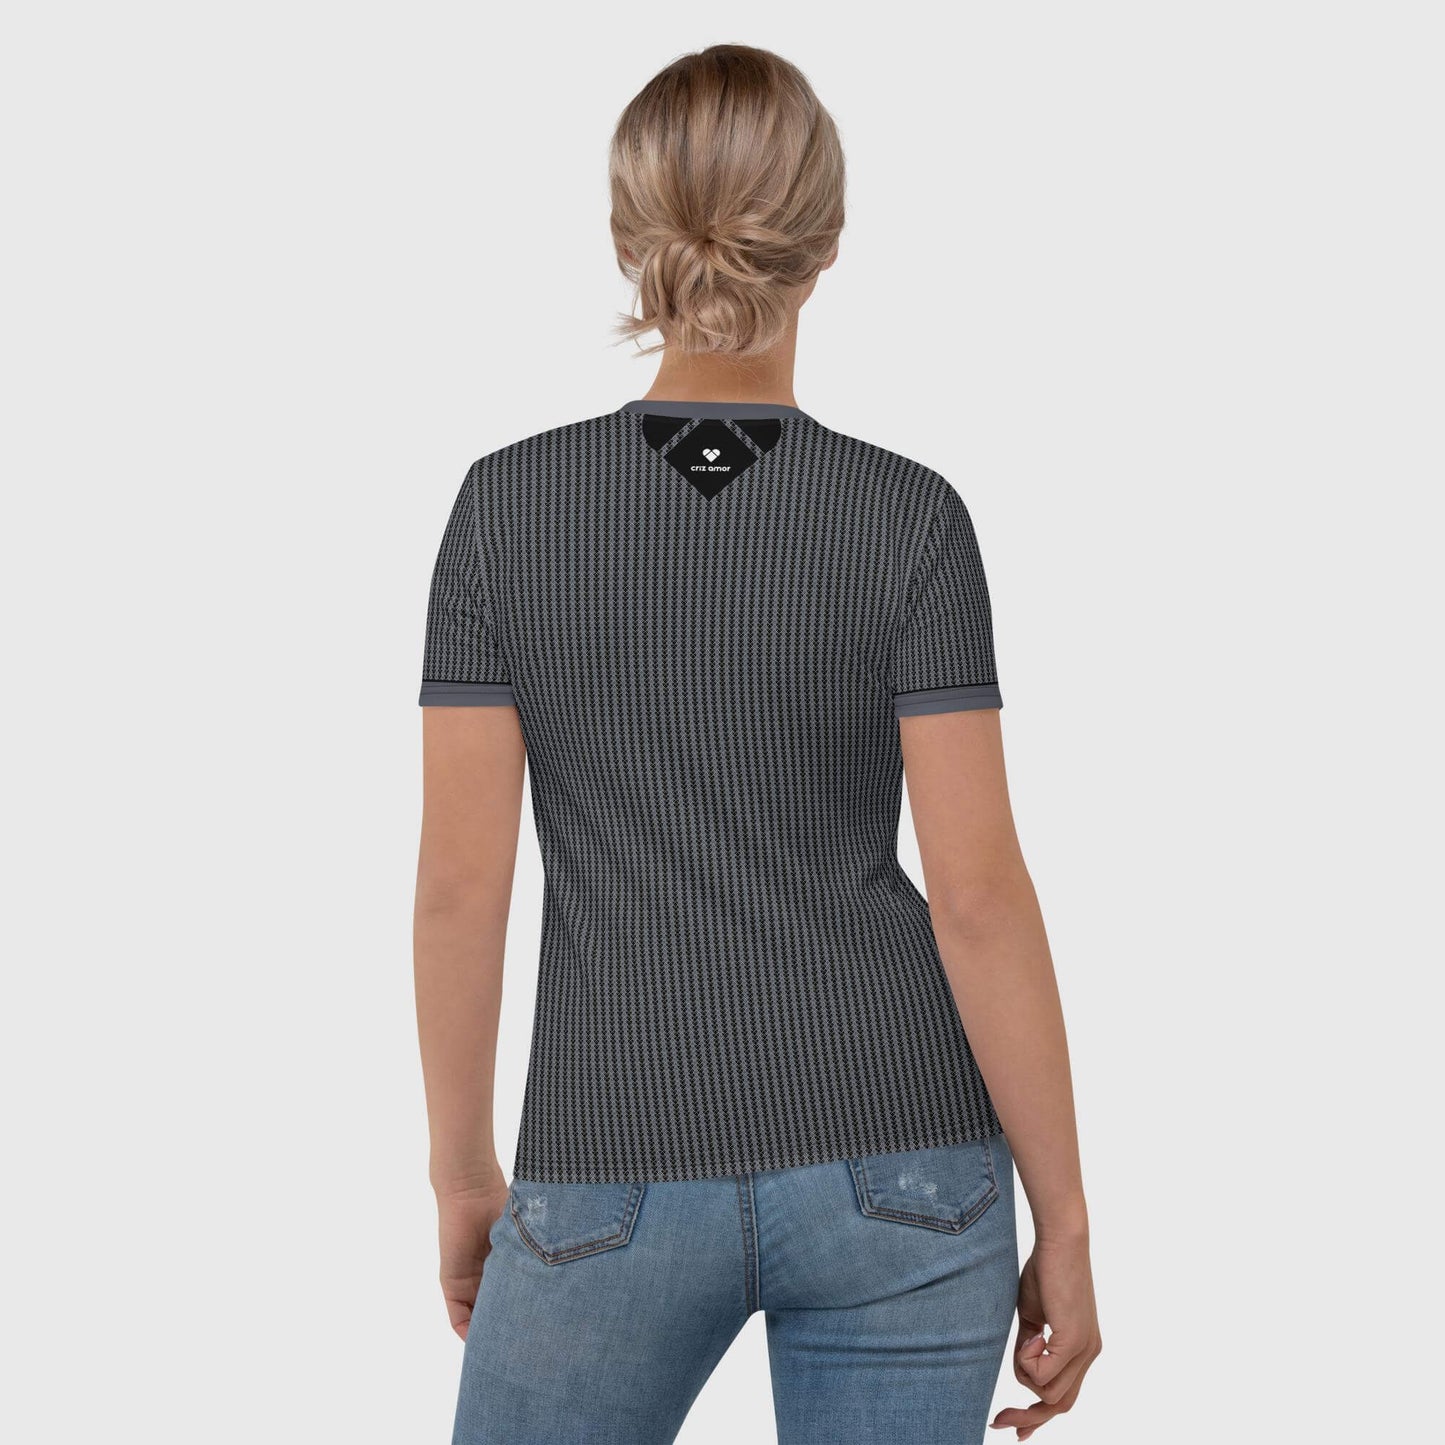 Lovogram Shirt with a dual-shade heart pattern that promotes self-love and confidence, back view model